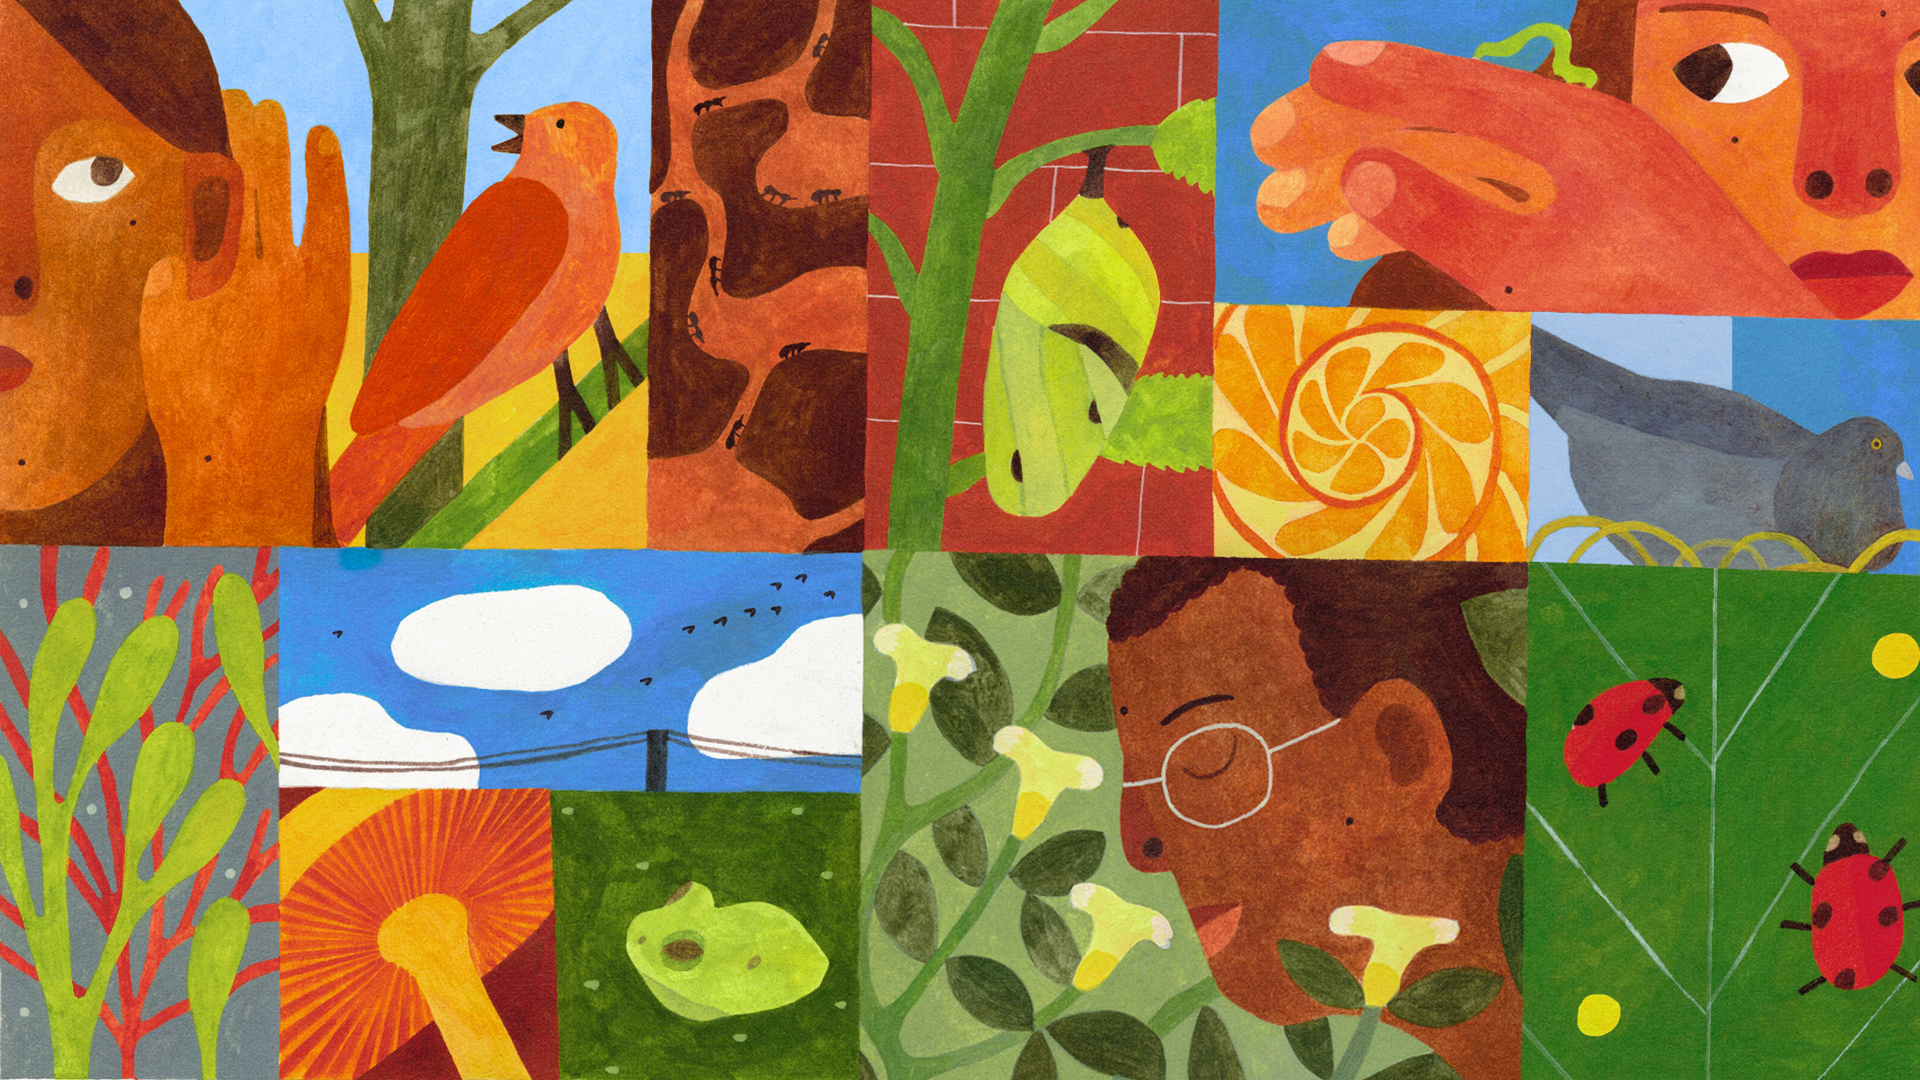 A brightly-colored illustration shows a woman with her hand to her ear listening to a songbird, close-ups of different plant and wildlife, a man smelling a honeysuckle flower, and a woman holding an inch worm on her hand to inspect it.